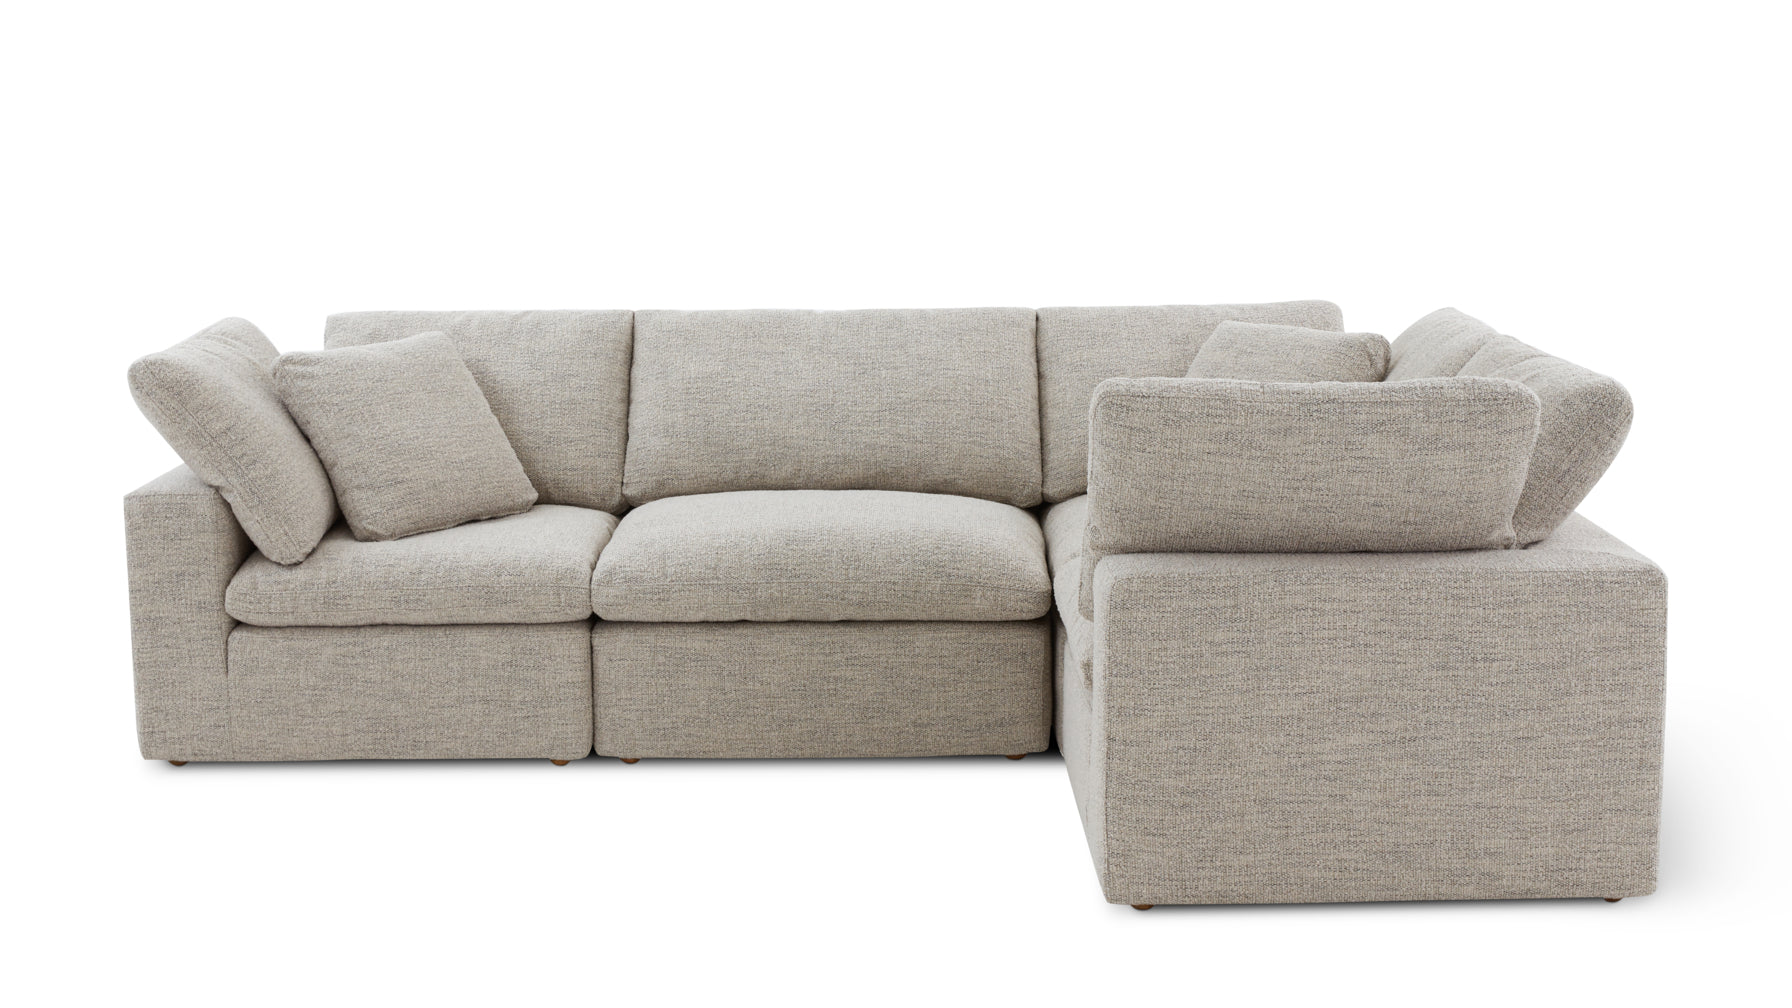 Movie Night™ 4-Piece Modular Sectional Closed, Standard, Oatmeal - Image 1